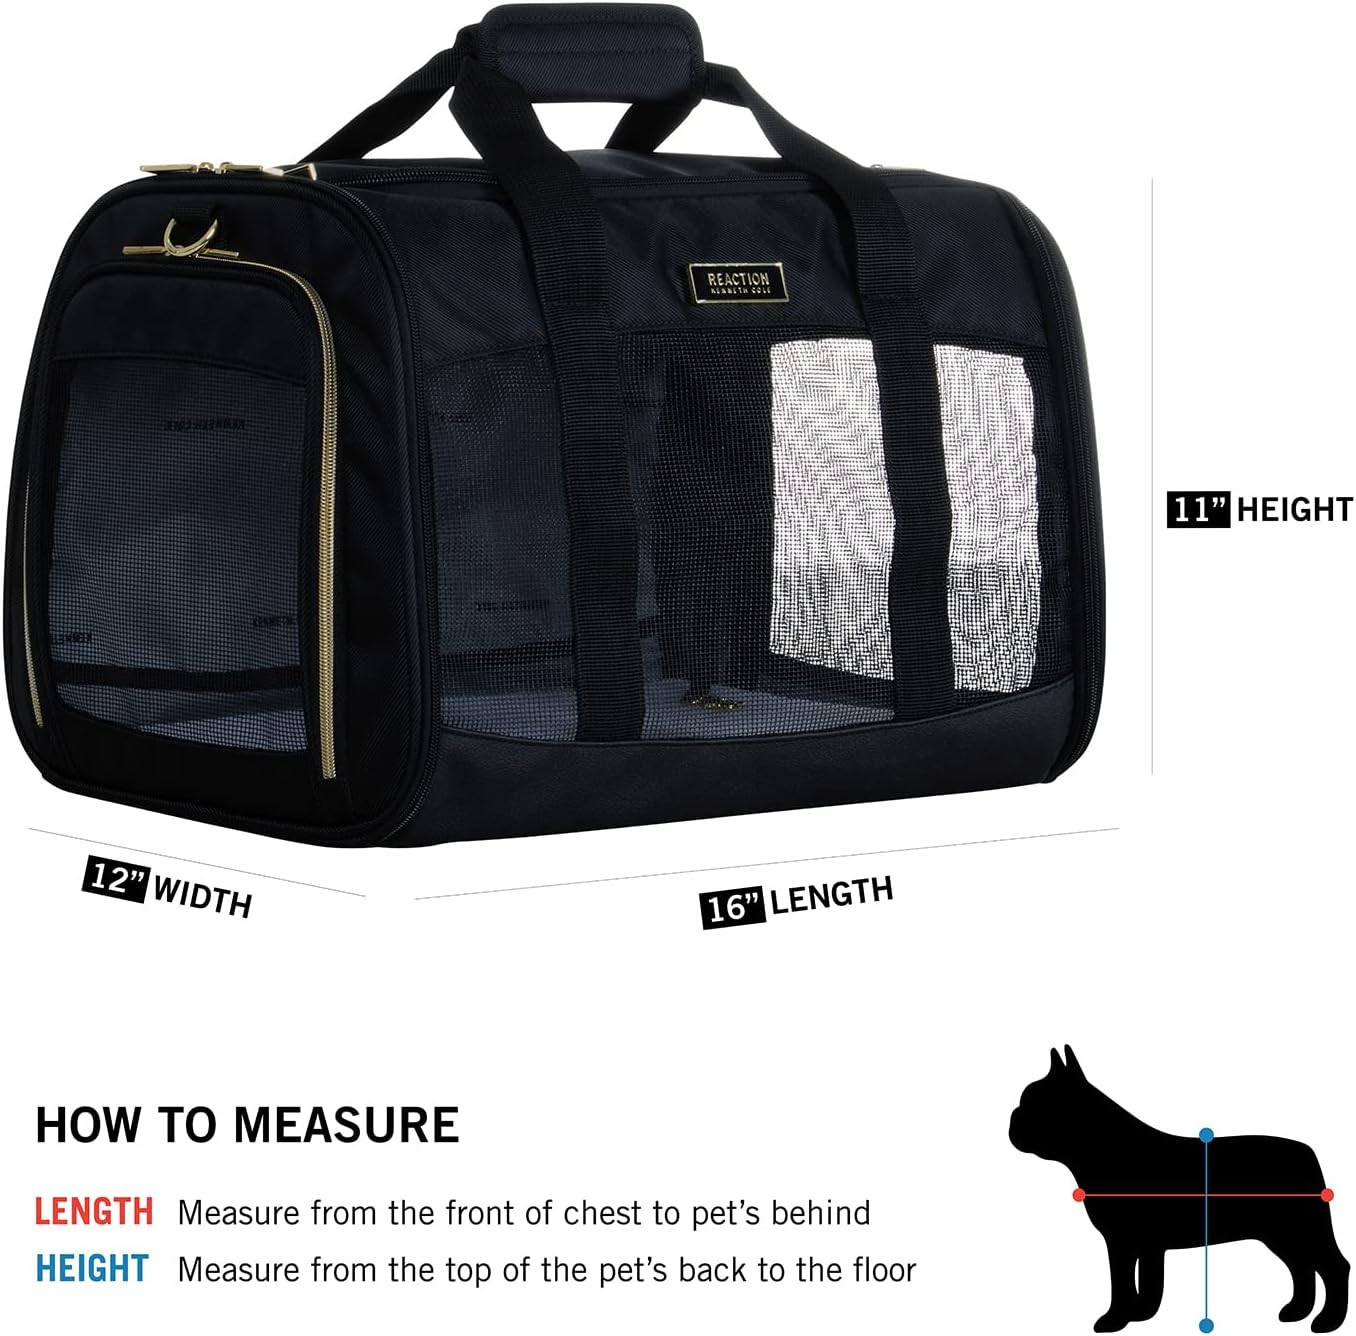 Kenneth Cole Reaction Collapsible Travel Pet Carrier Soft Multi-Entry Folding Portable Kennel Crate for Puppy Dog, Cat, and Rabbit Carrier Bag,Up to 16 Lbs,Black